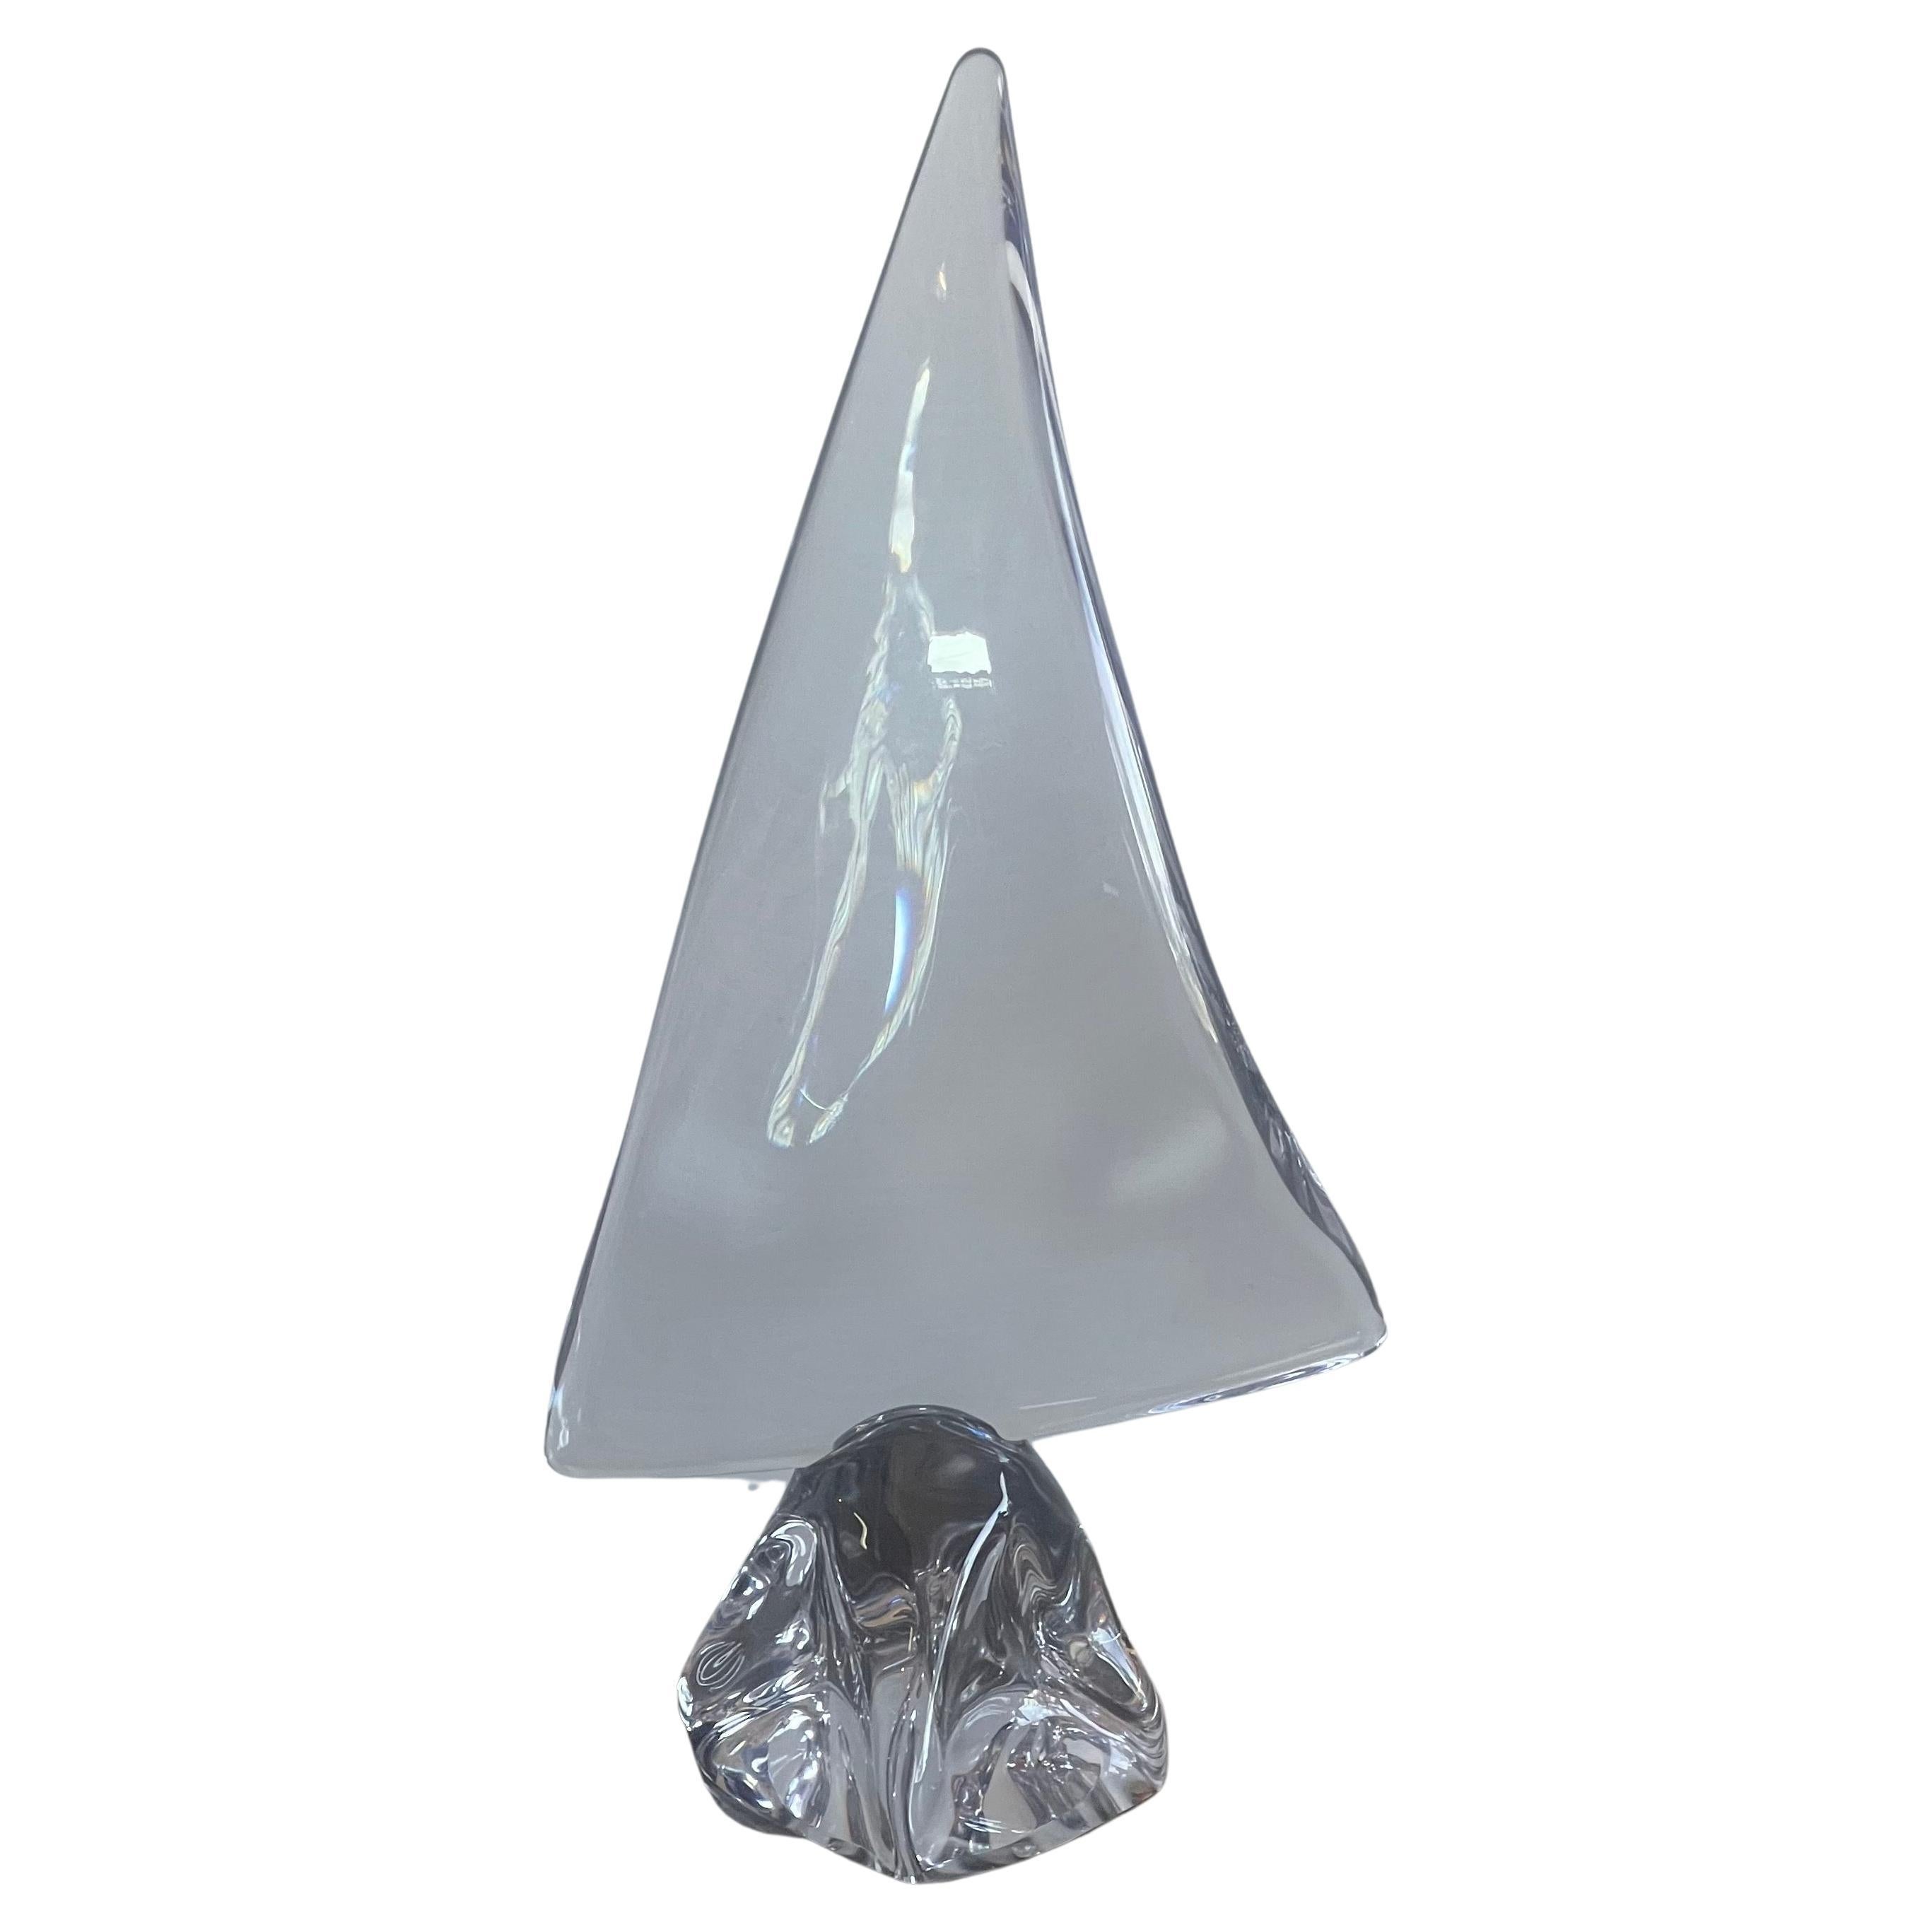 Large crystal sailboat sculpture by Daum, France, circa 1970s. The piece is invery good vintage condition with no chips or cracks and measures 8